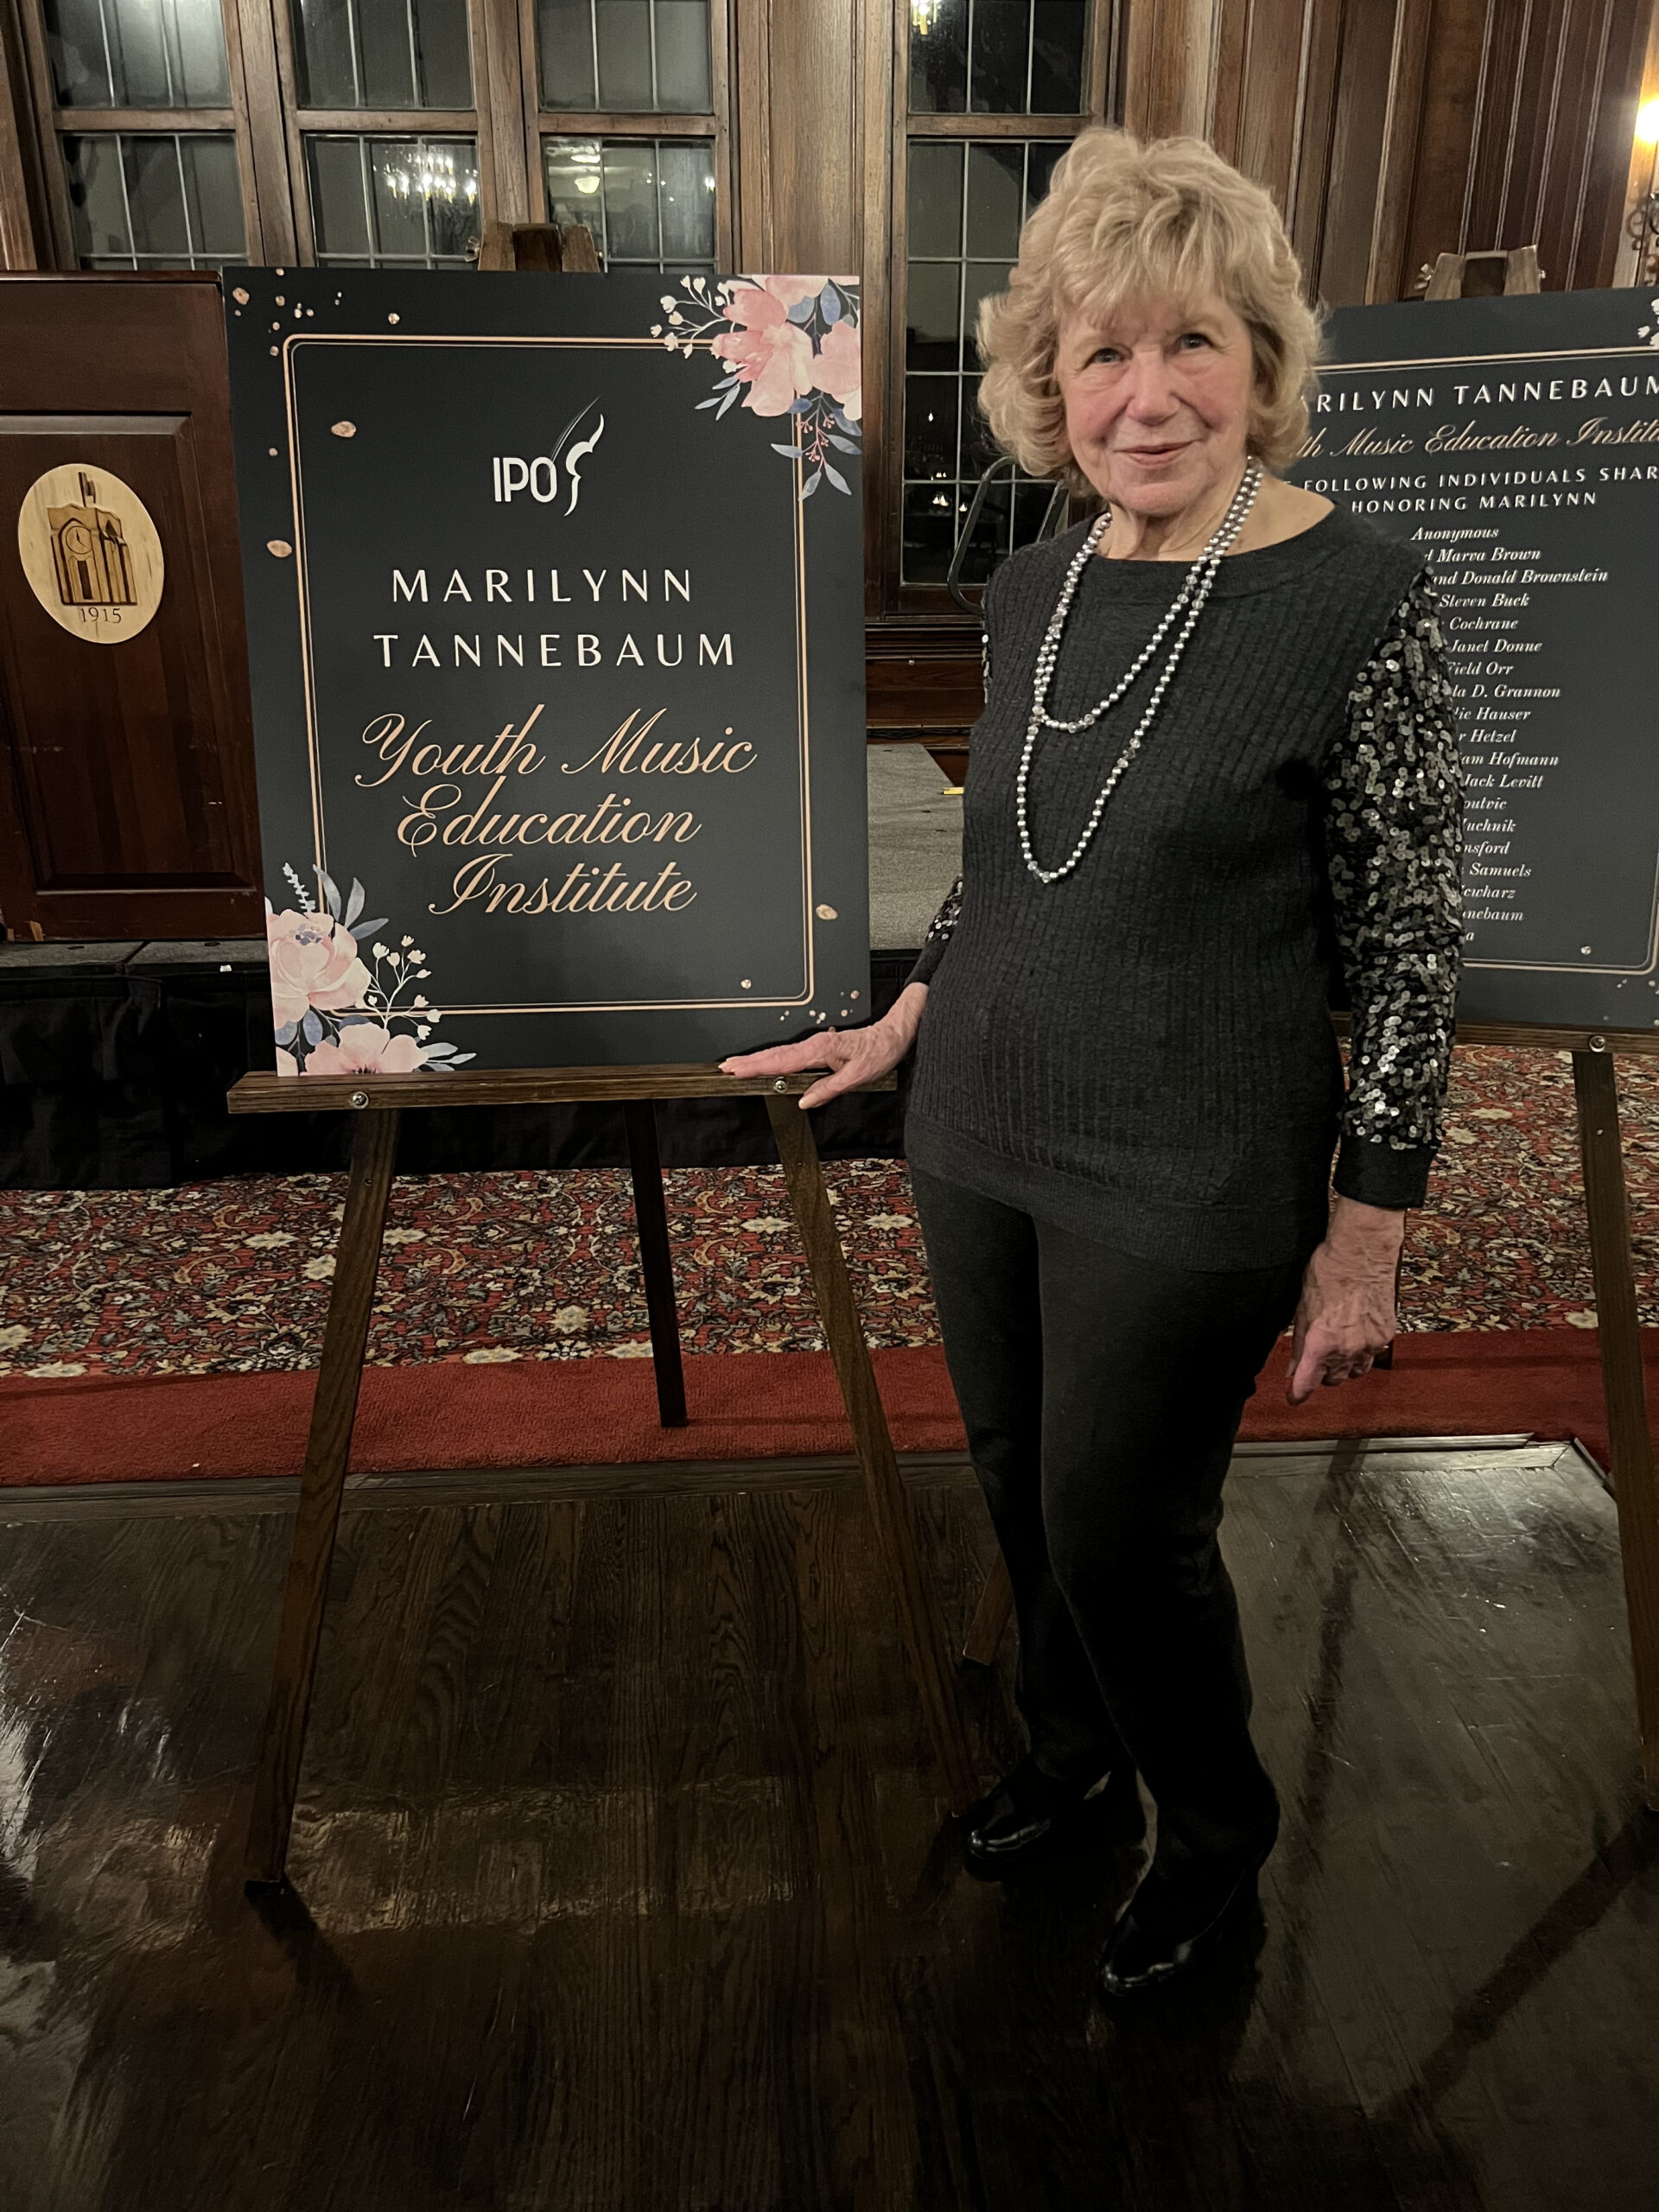 Marilyn Tannenbaum posing next to an easel with a sign announcing the new education program named after her.